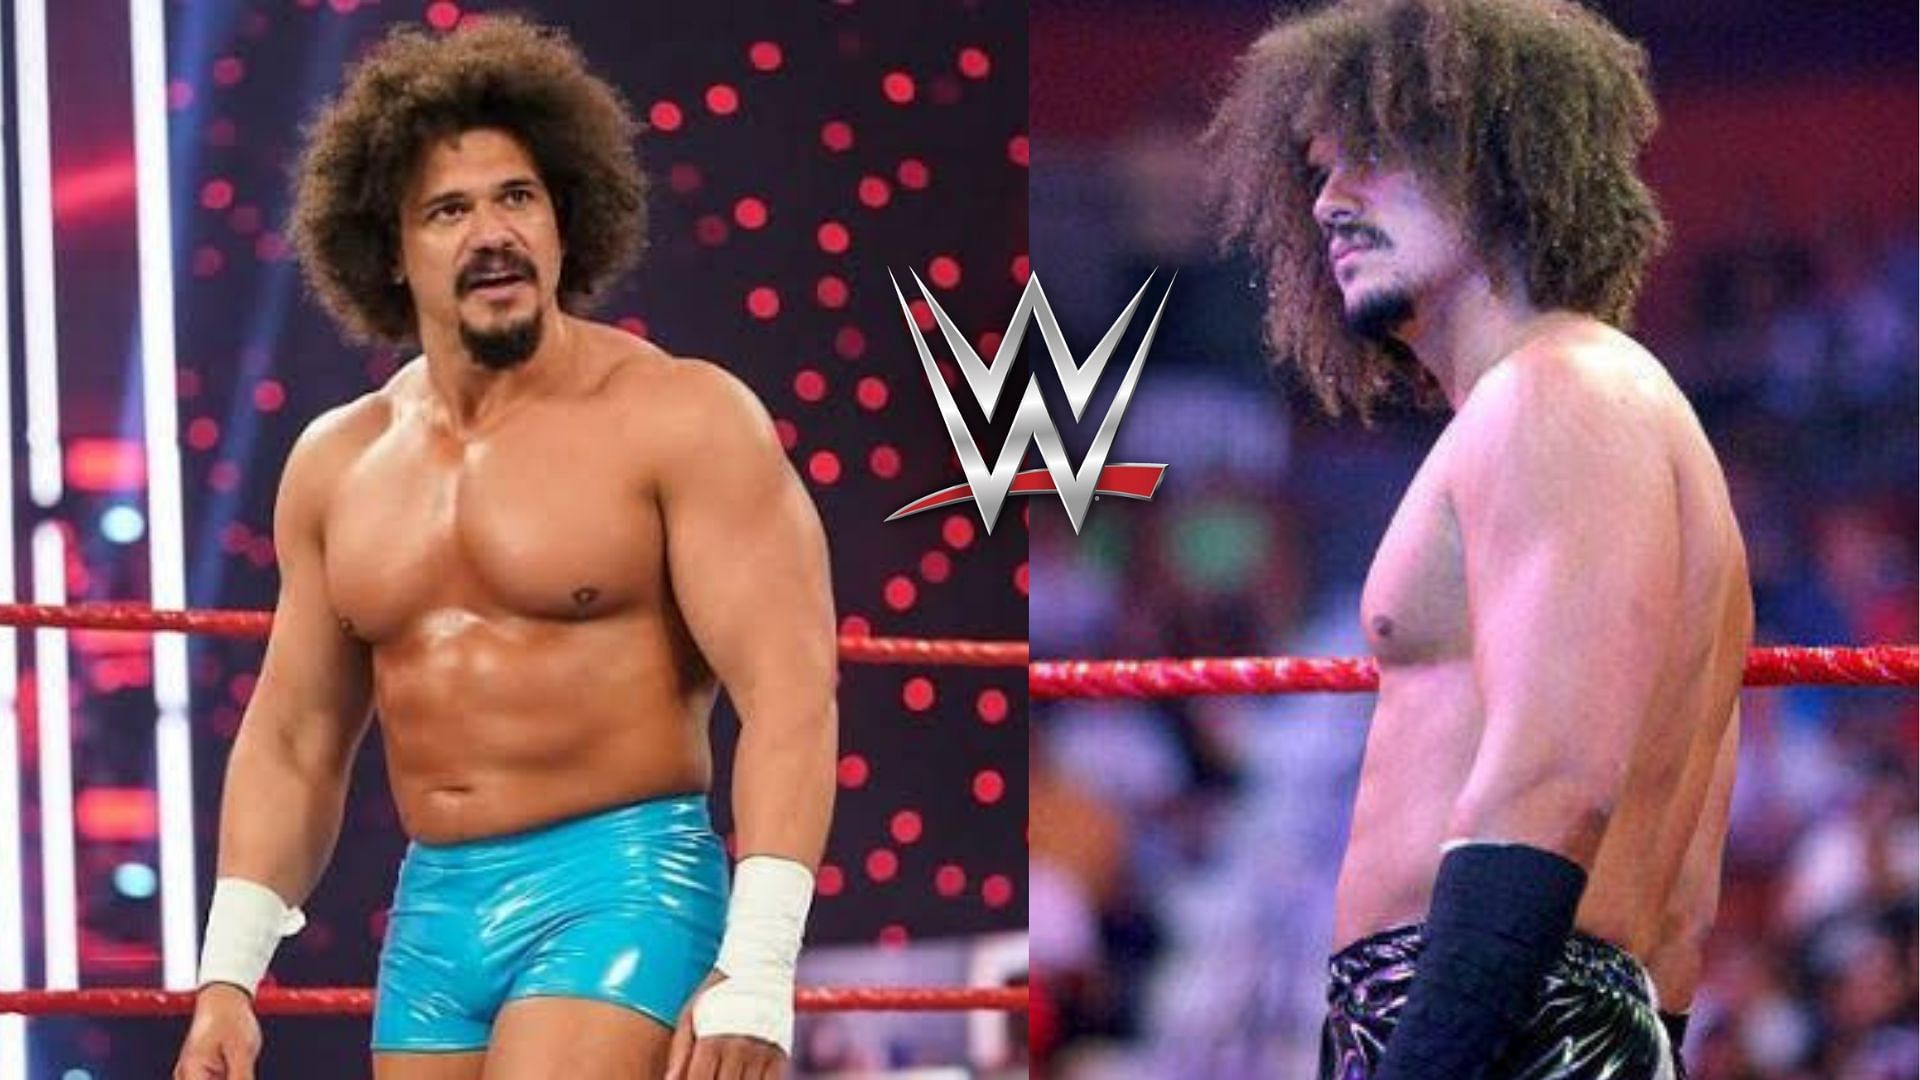 Carlito has over 20 years of wrestling experience